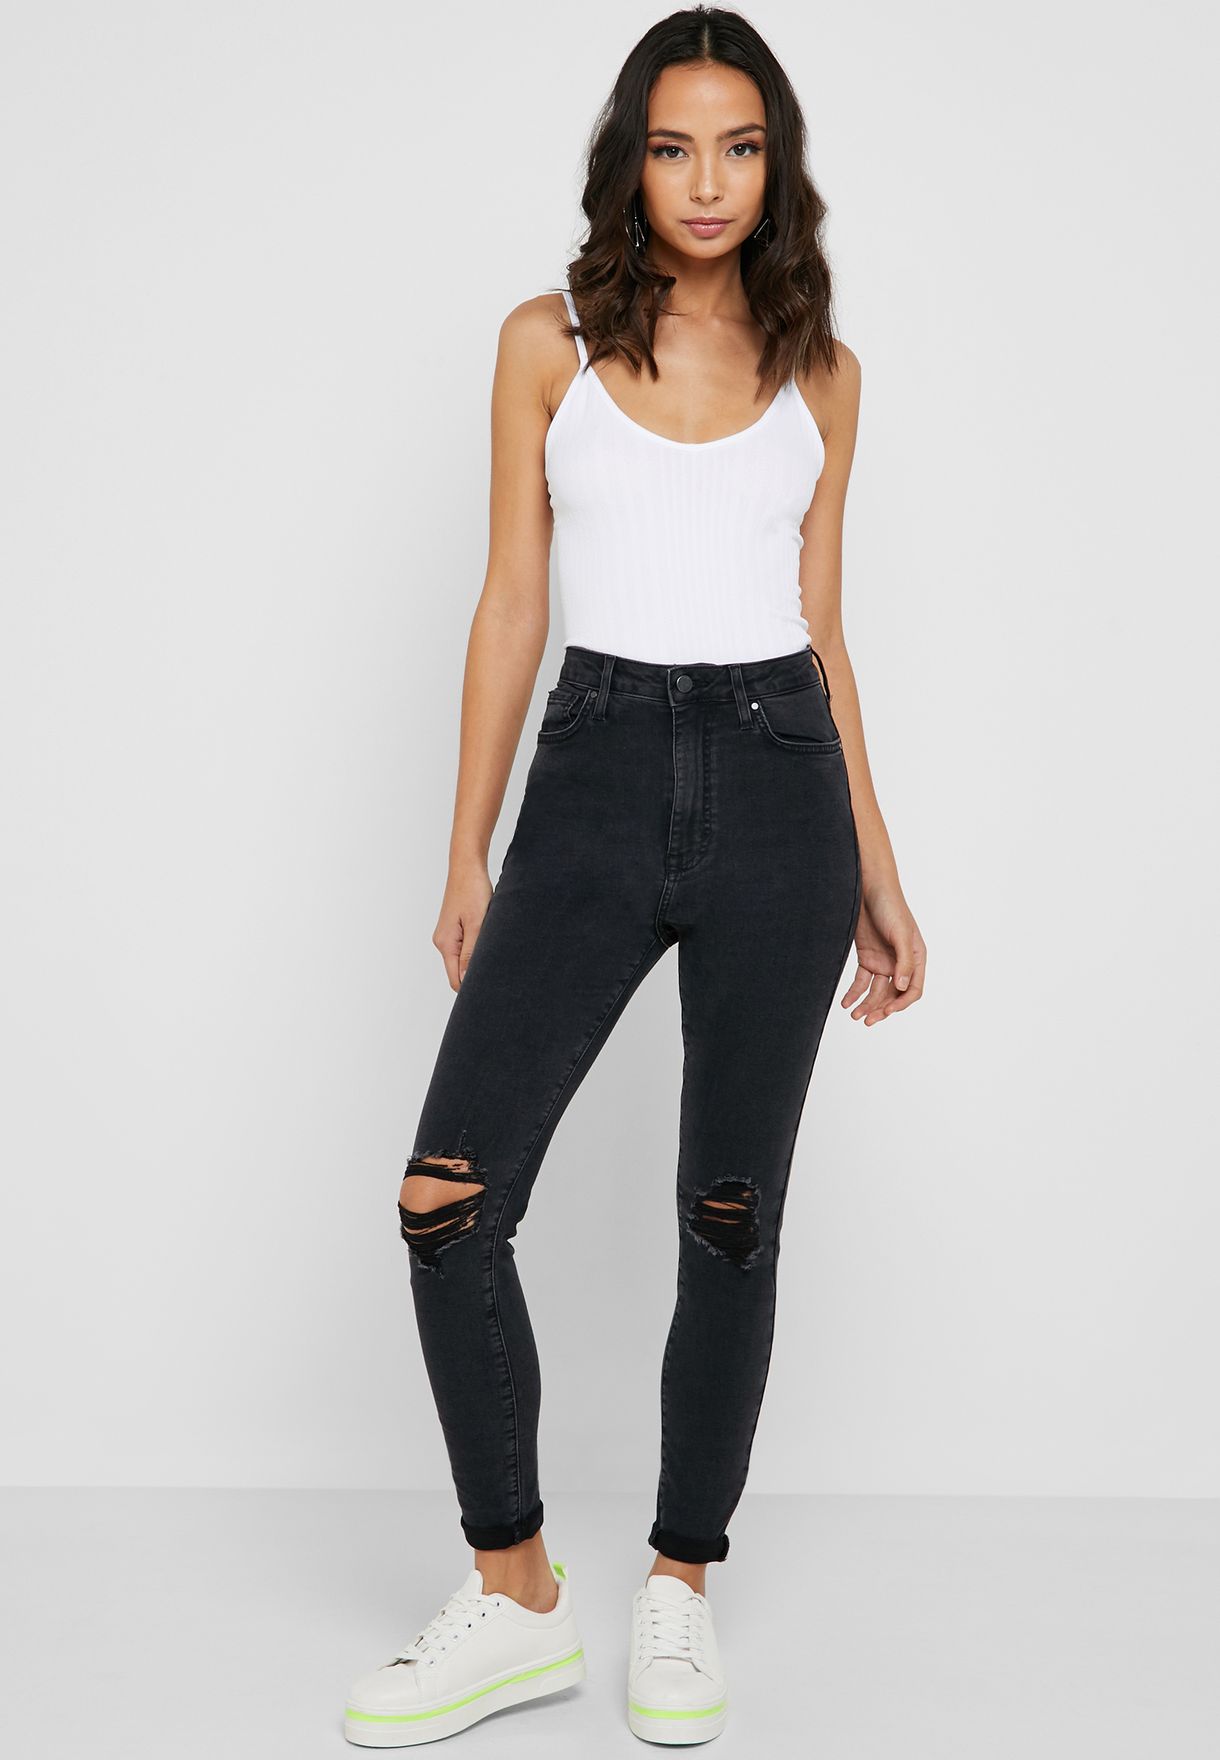 forever 21 ripped skinny jeans